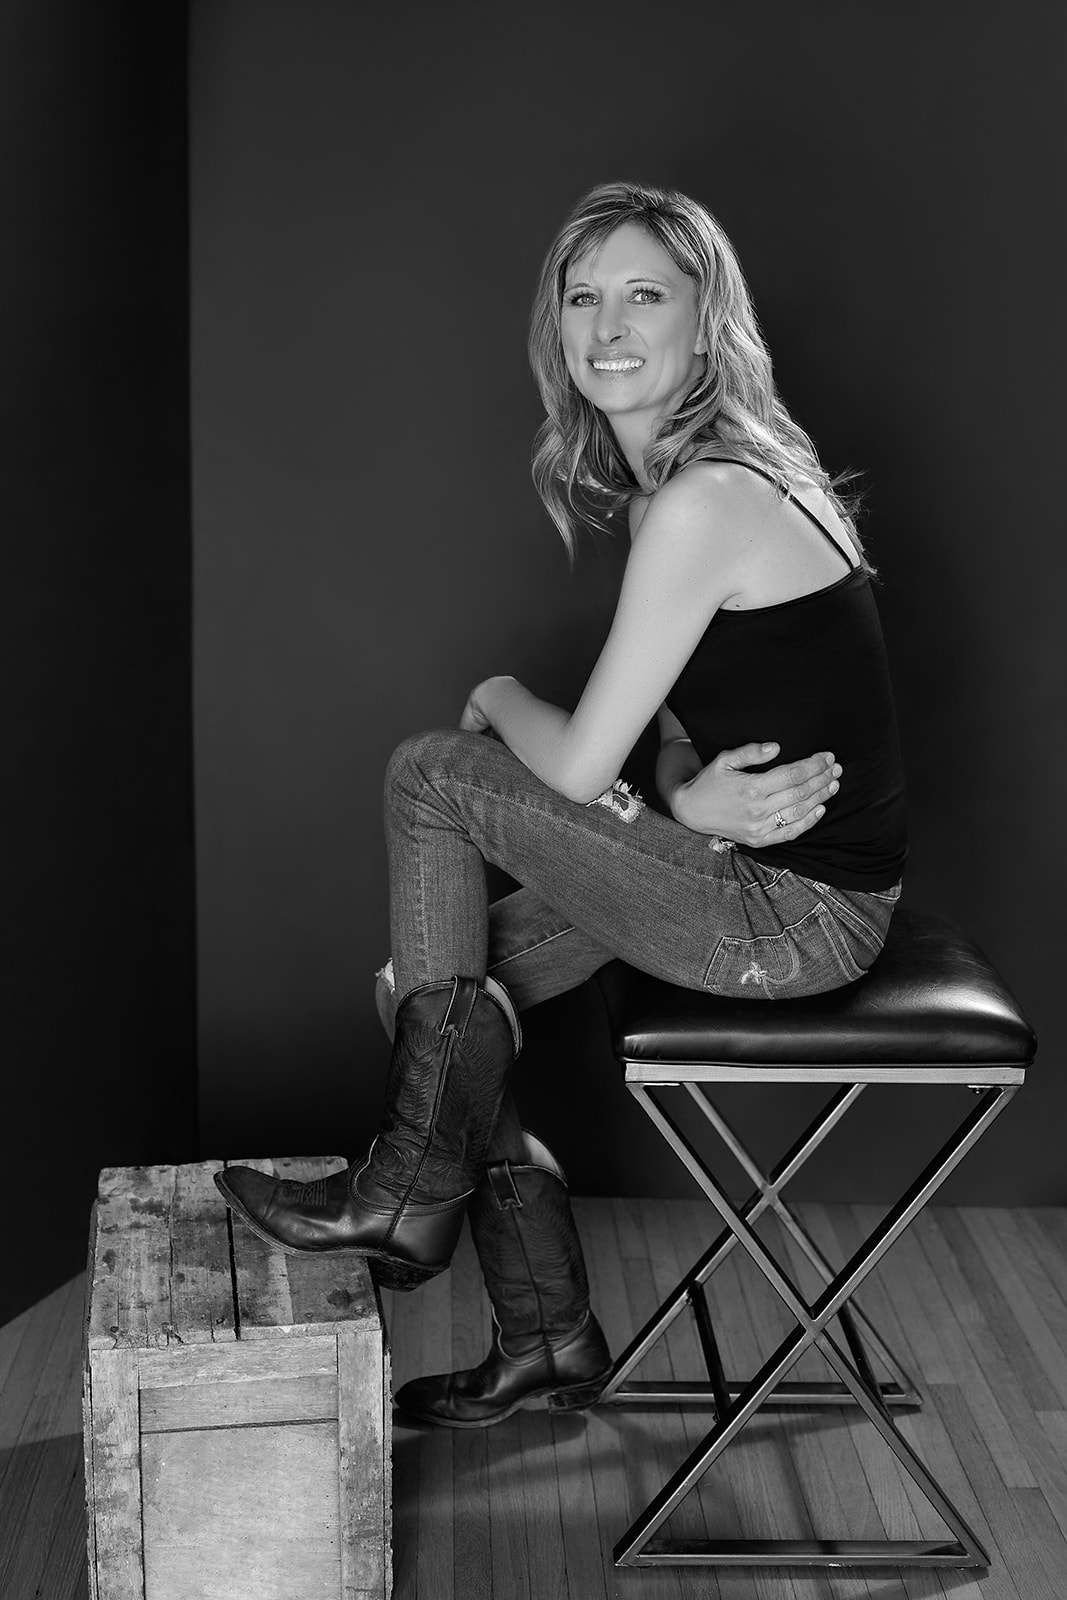 Woman sitting on stool with legs up wearing cowboy boots and looking at camera